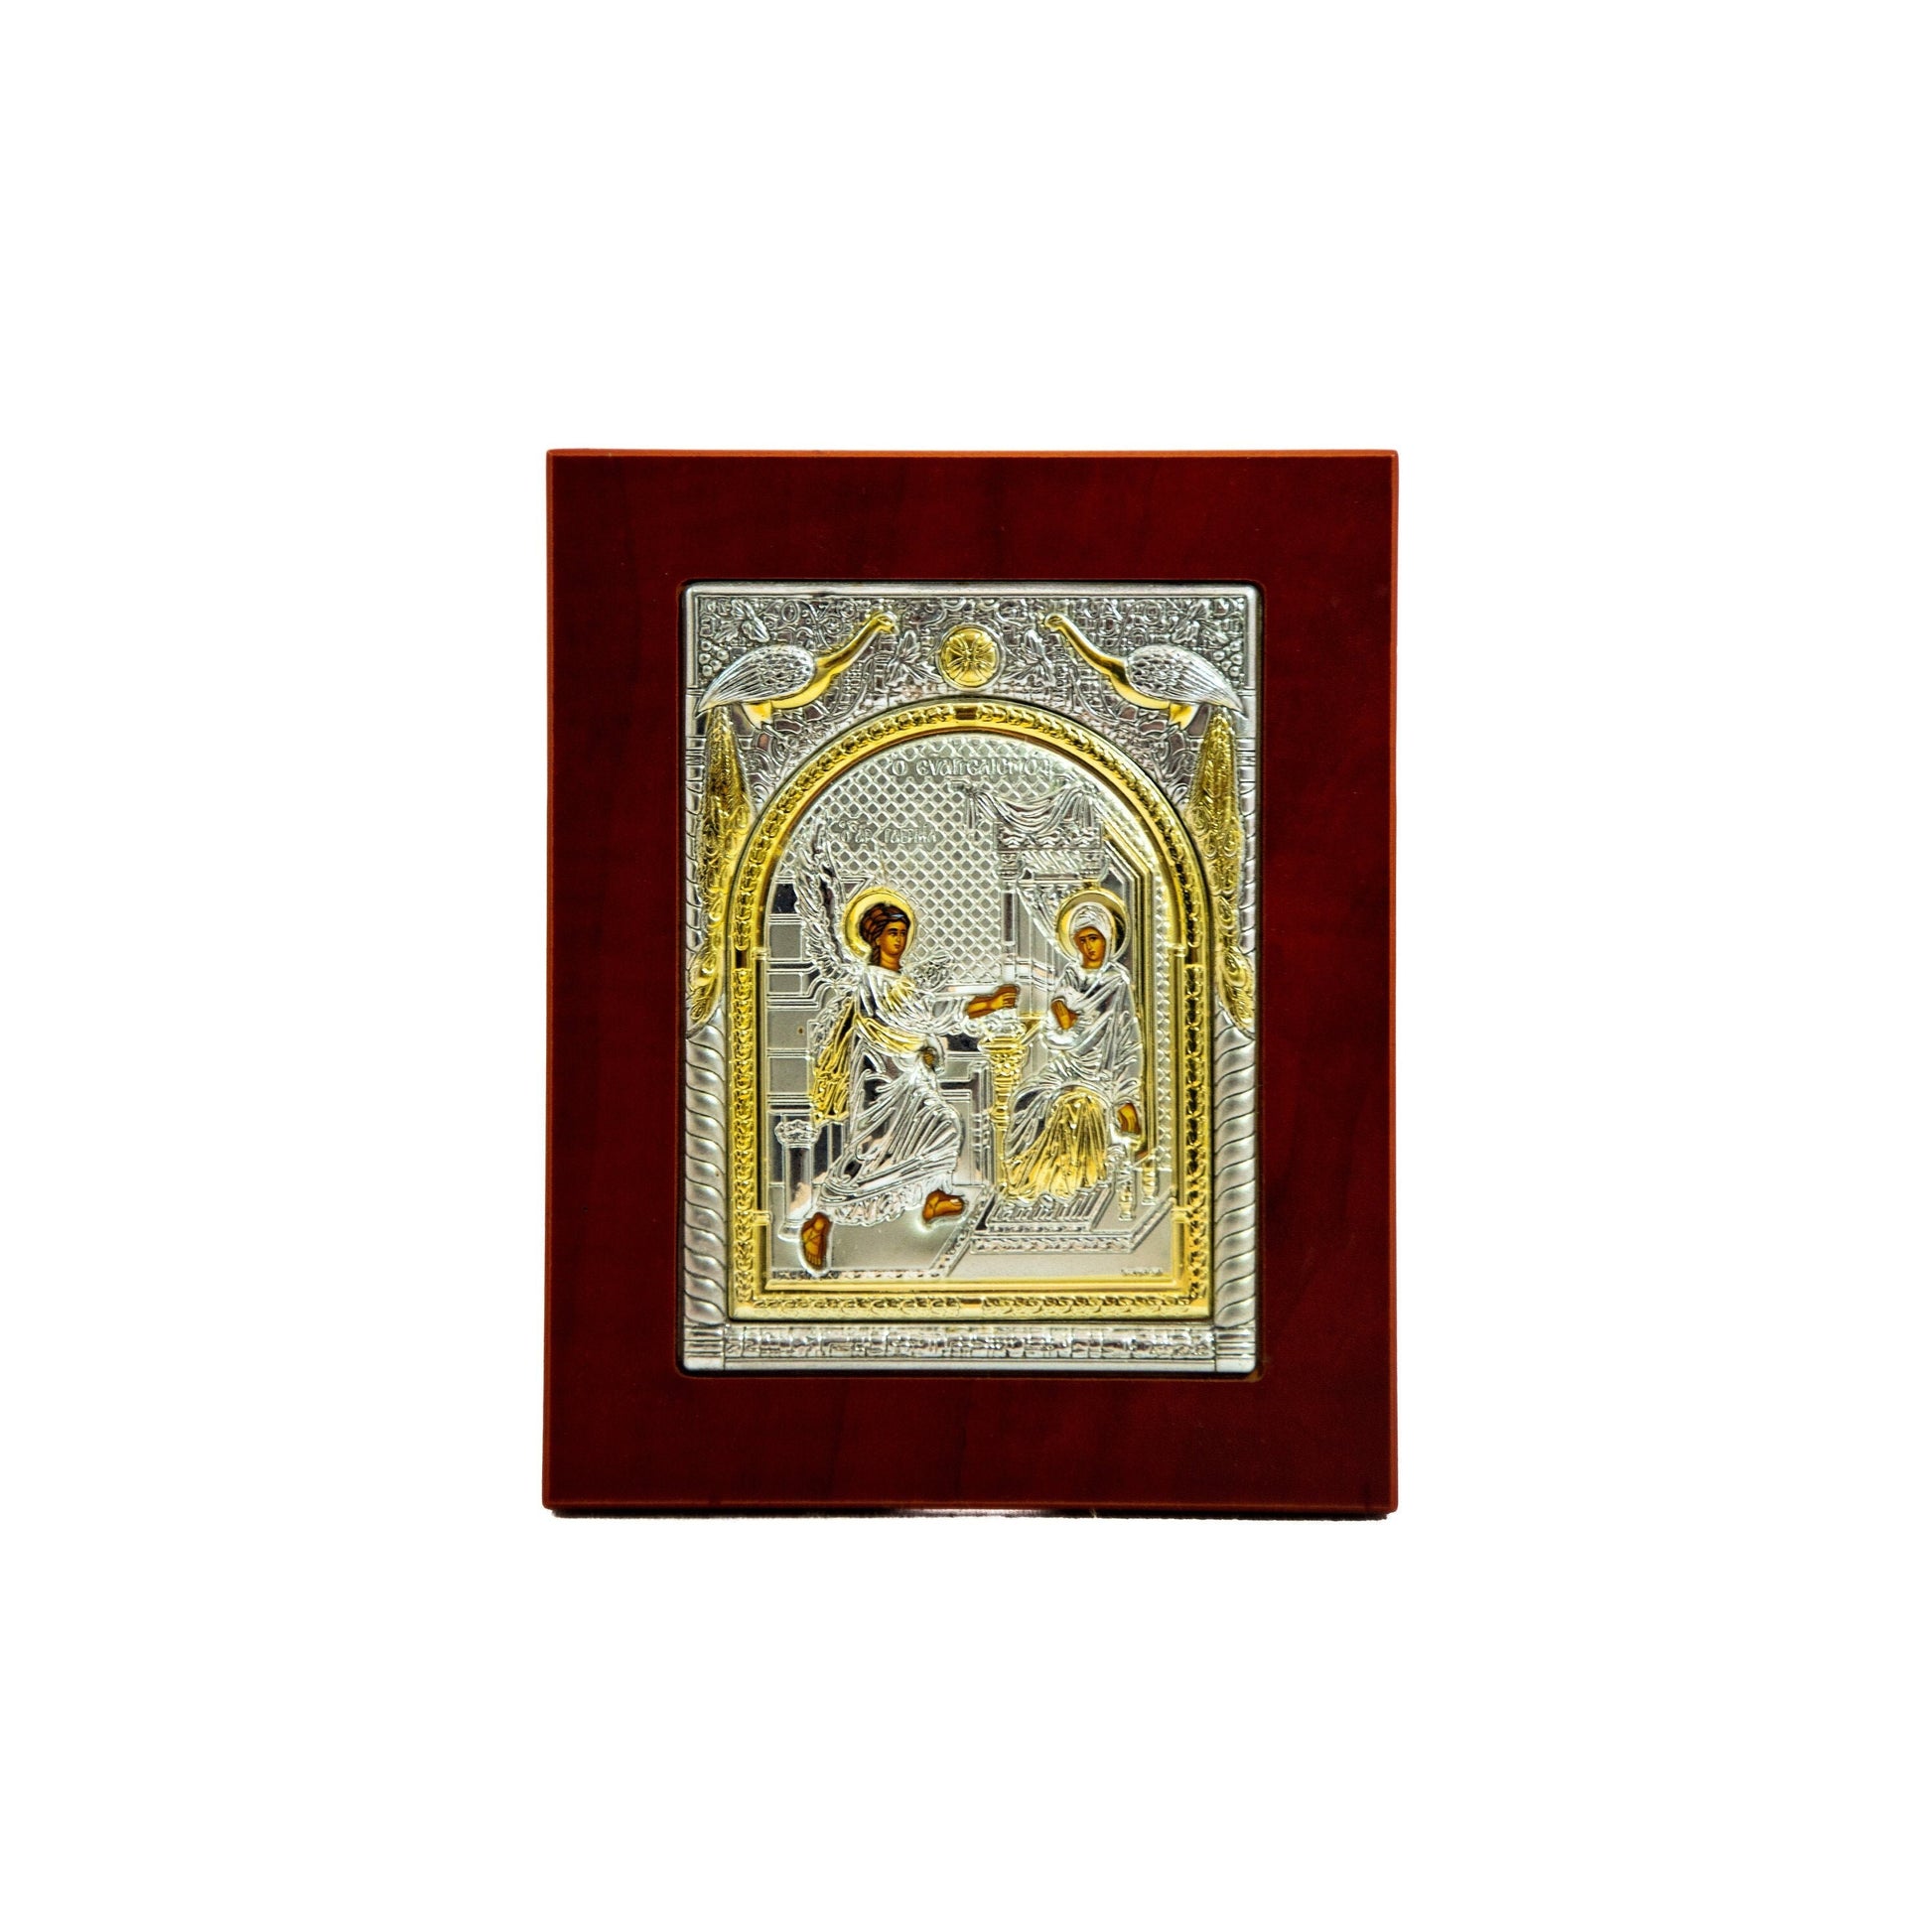 The Annunciation of Virgin Mary icon, Handmade Silver Greek Orthodox Icon of Mother of God, Theotokos Byzantine art wall hanging wood plaque TheHolyArt